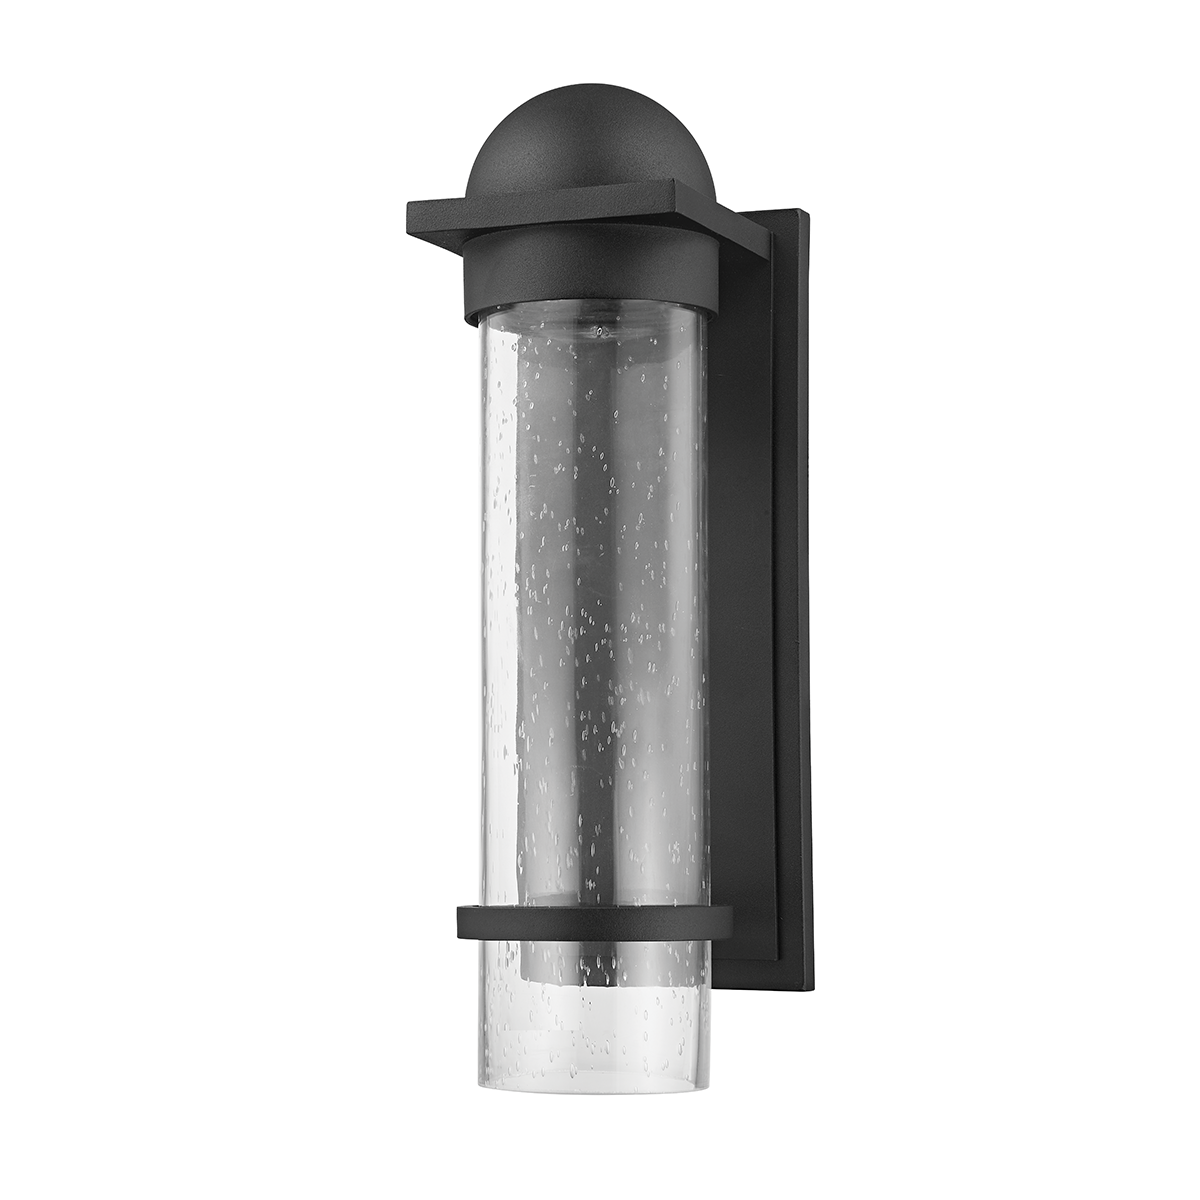 Troy NERO 1 LIGHT LARGE EXTERIOR WALL SCONCE B7116 Outdoor l Wall Troy Lighting   